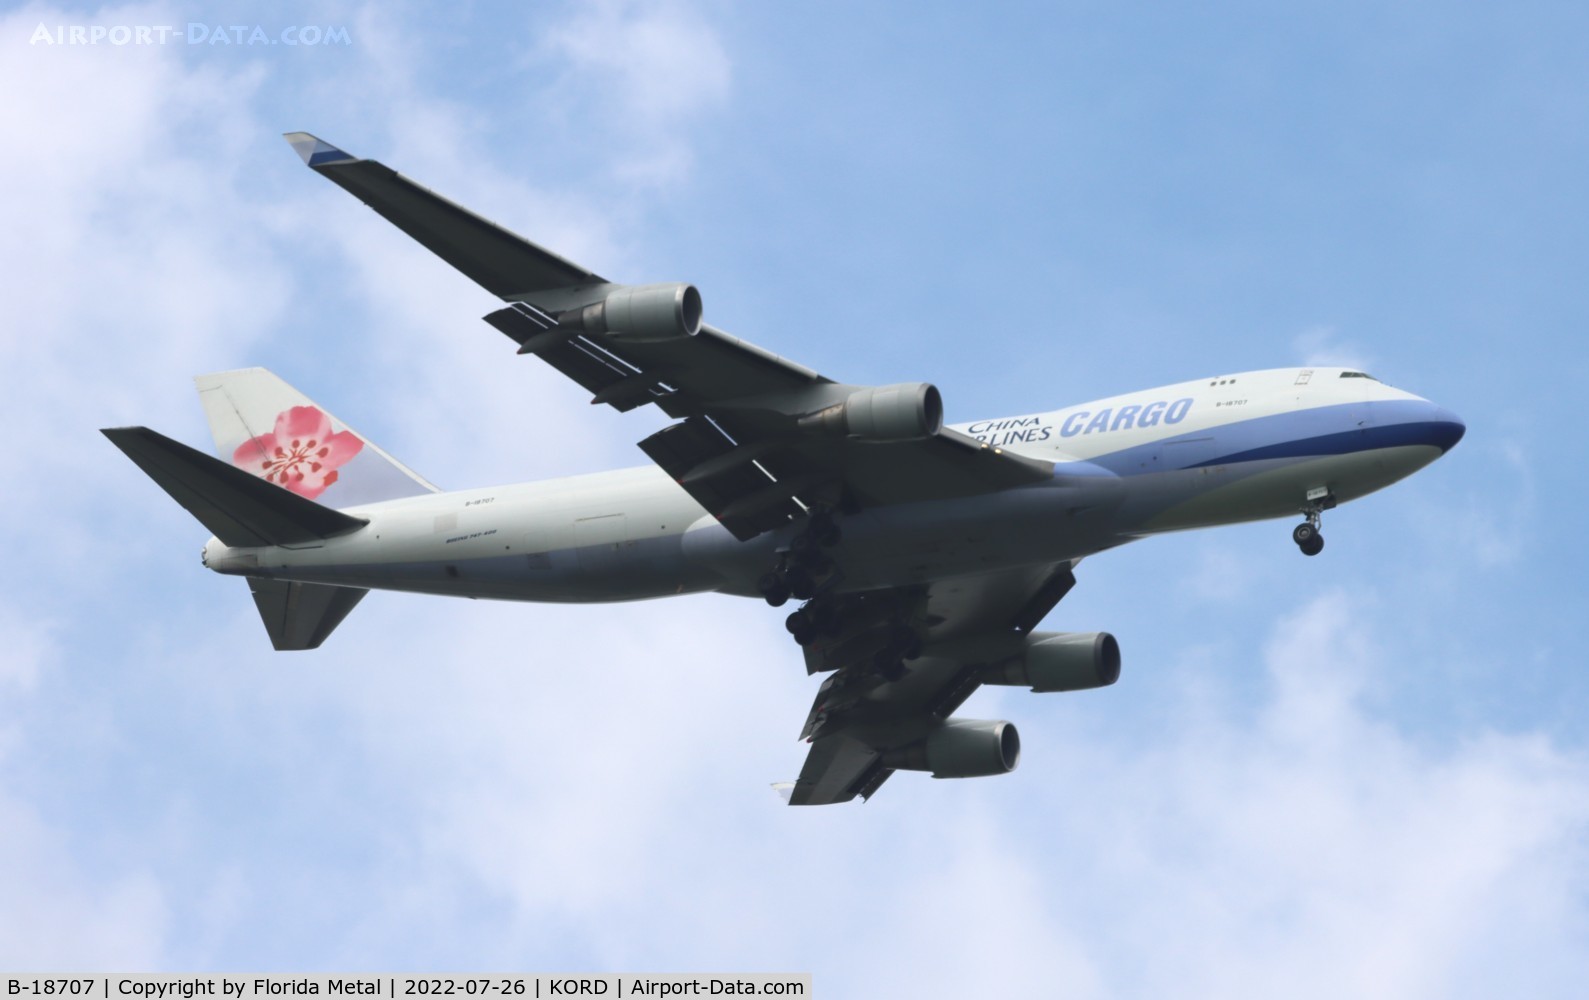 B-18707, 2001 Boeing 747-409F/SCD C/N 30764, China Airlines Cargo 747-400F